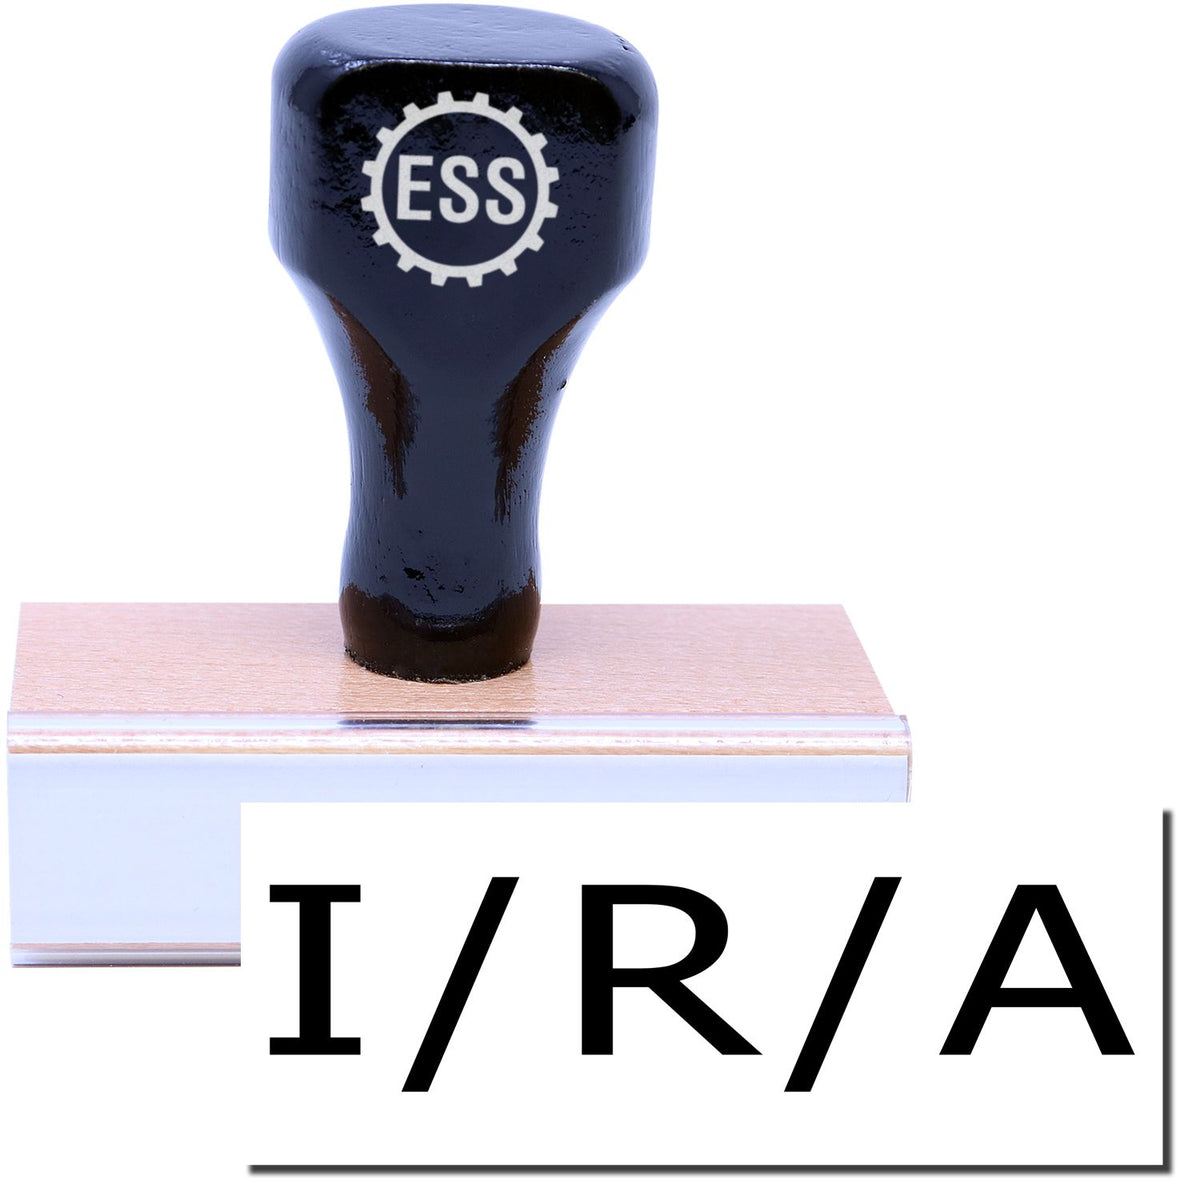 A stock office rubber stamp with a stamped image showing how the text &quot;I / R / A&quot; in a large font is displayed after stamping.